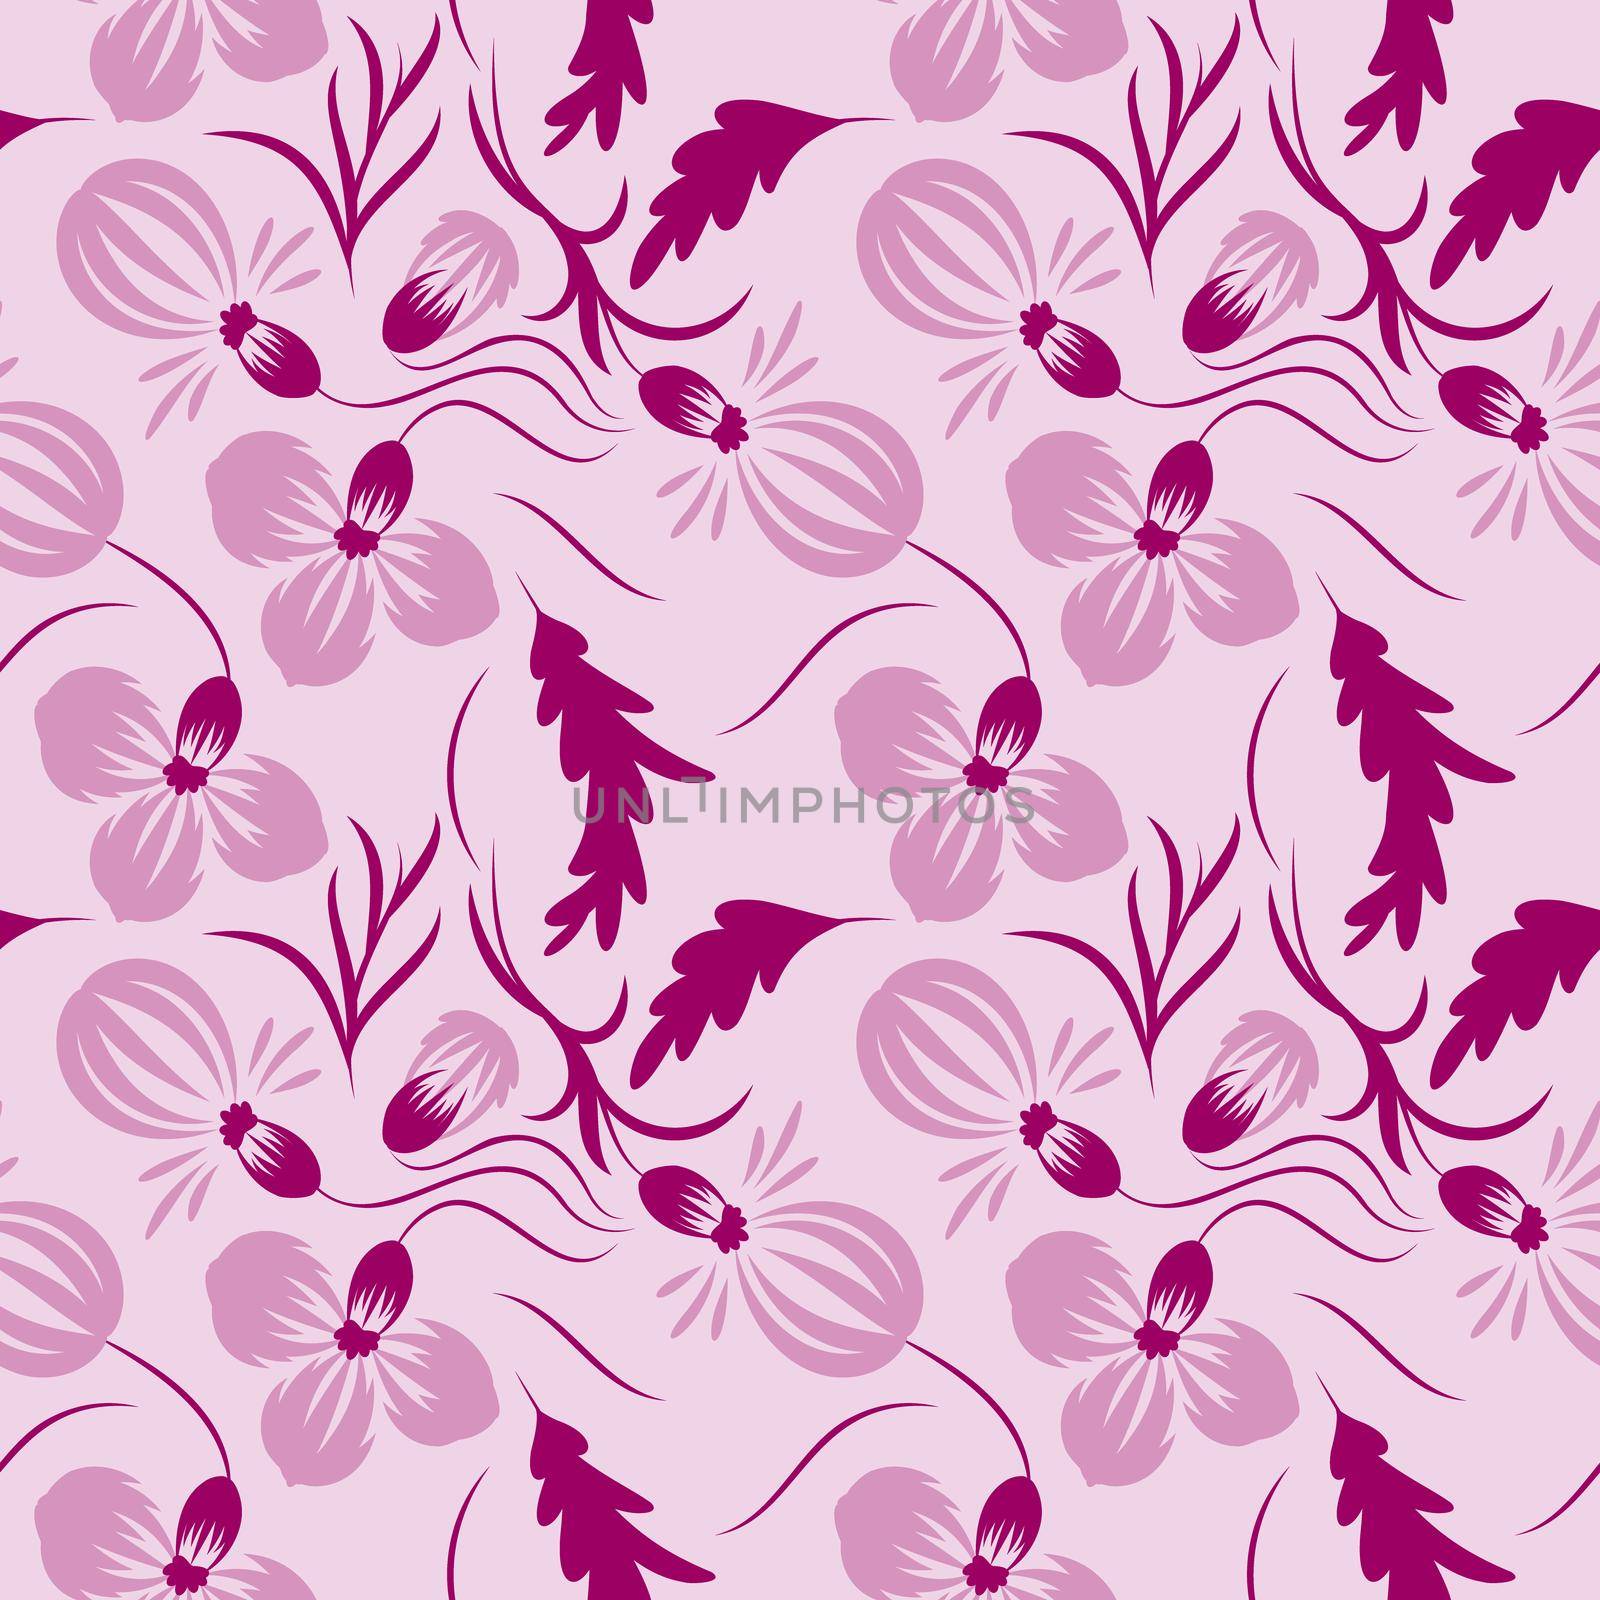 Folk floral abstract seamless pattern fantasy flowers by eskimos